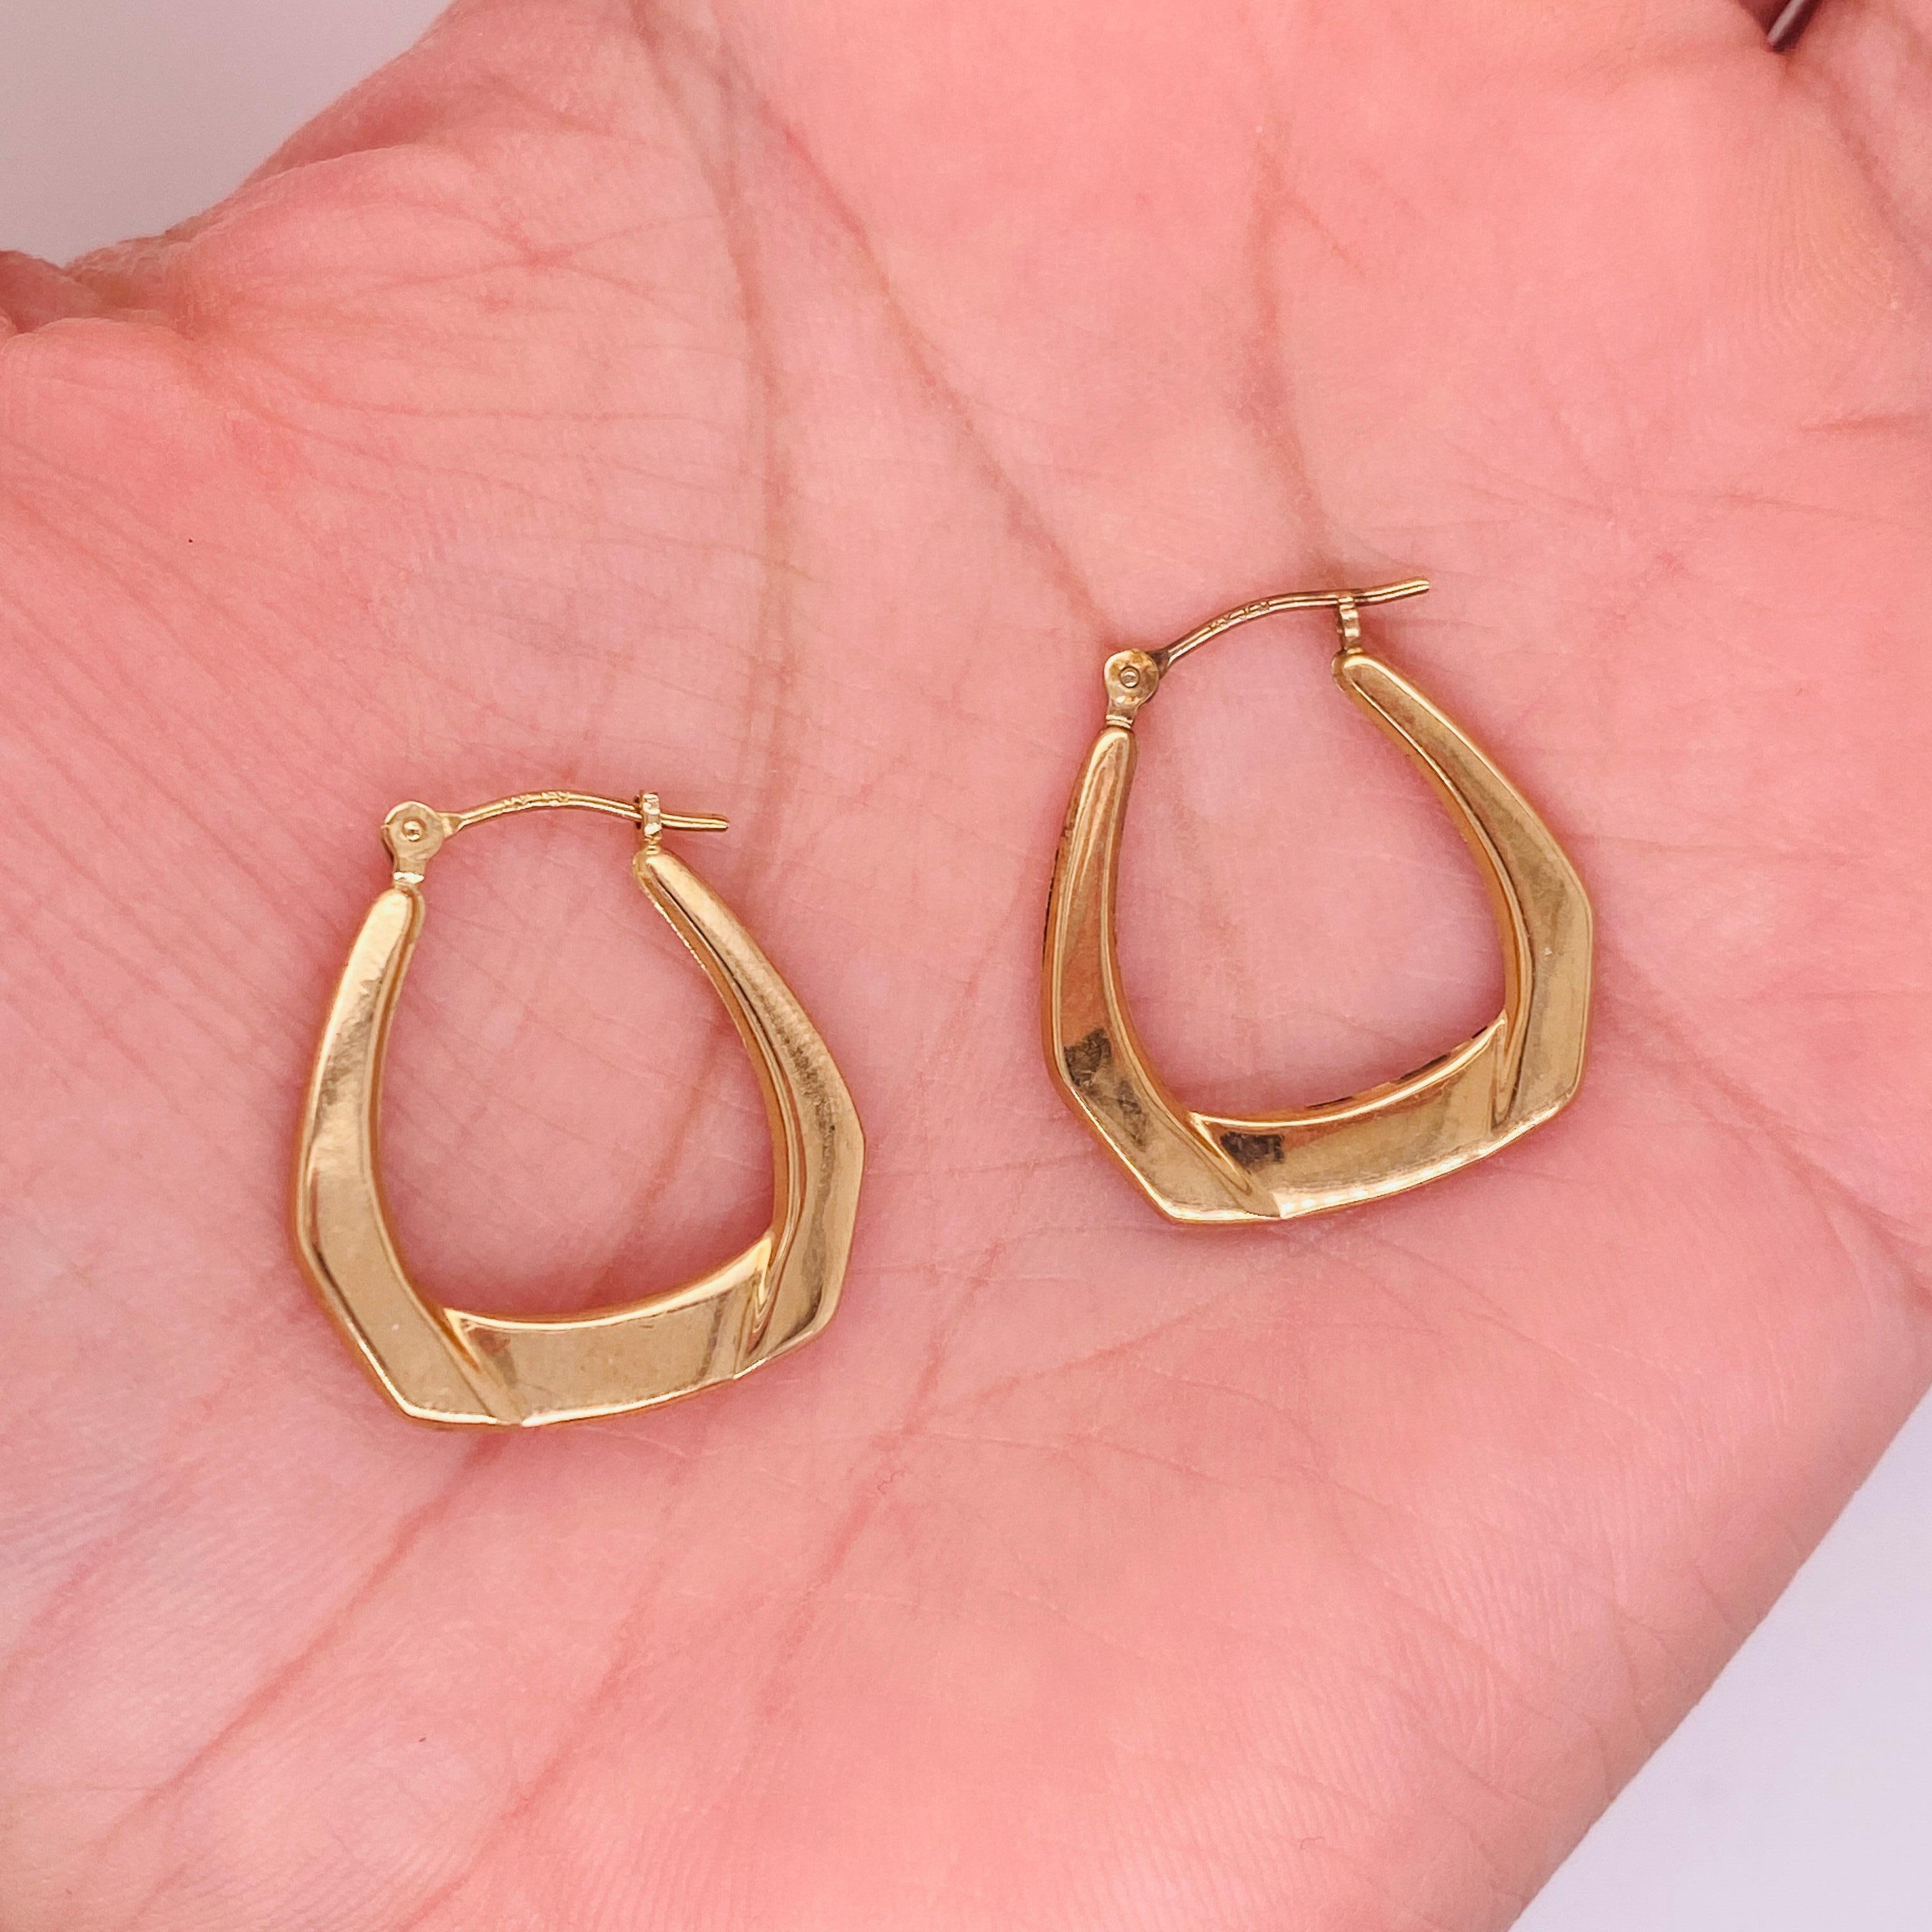 Origami Fold Hoops 14 Karat Yellow Gold Dangle Earrings Lightweight Design LV In Excellent Condition For Sale In Austin, TX